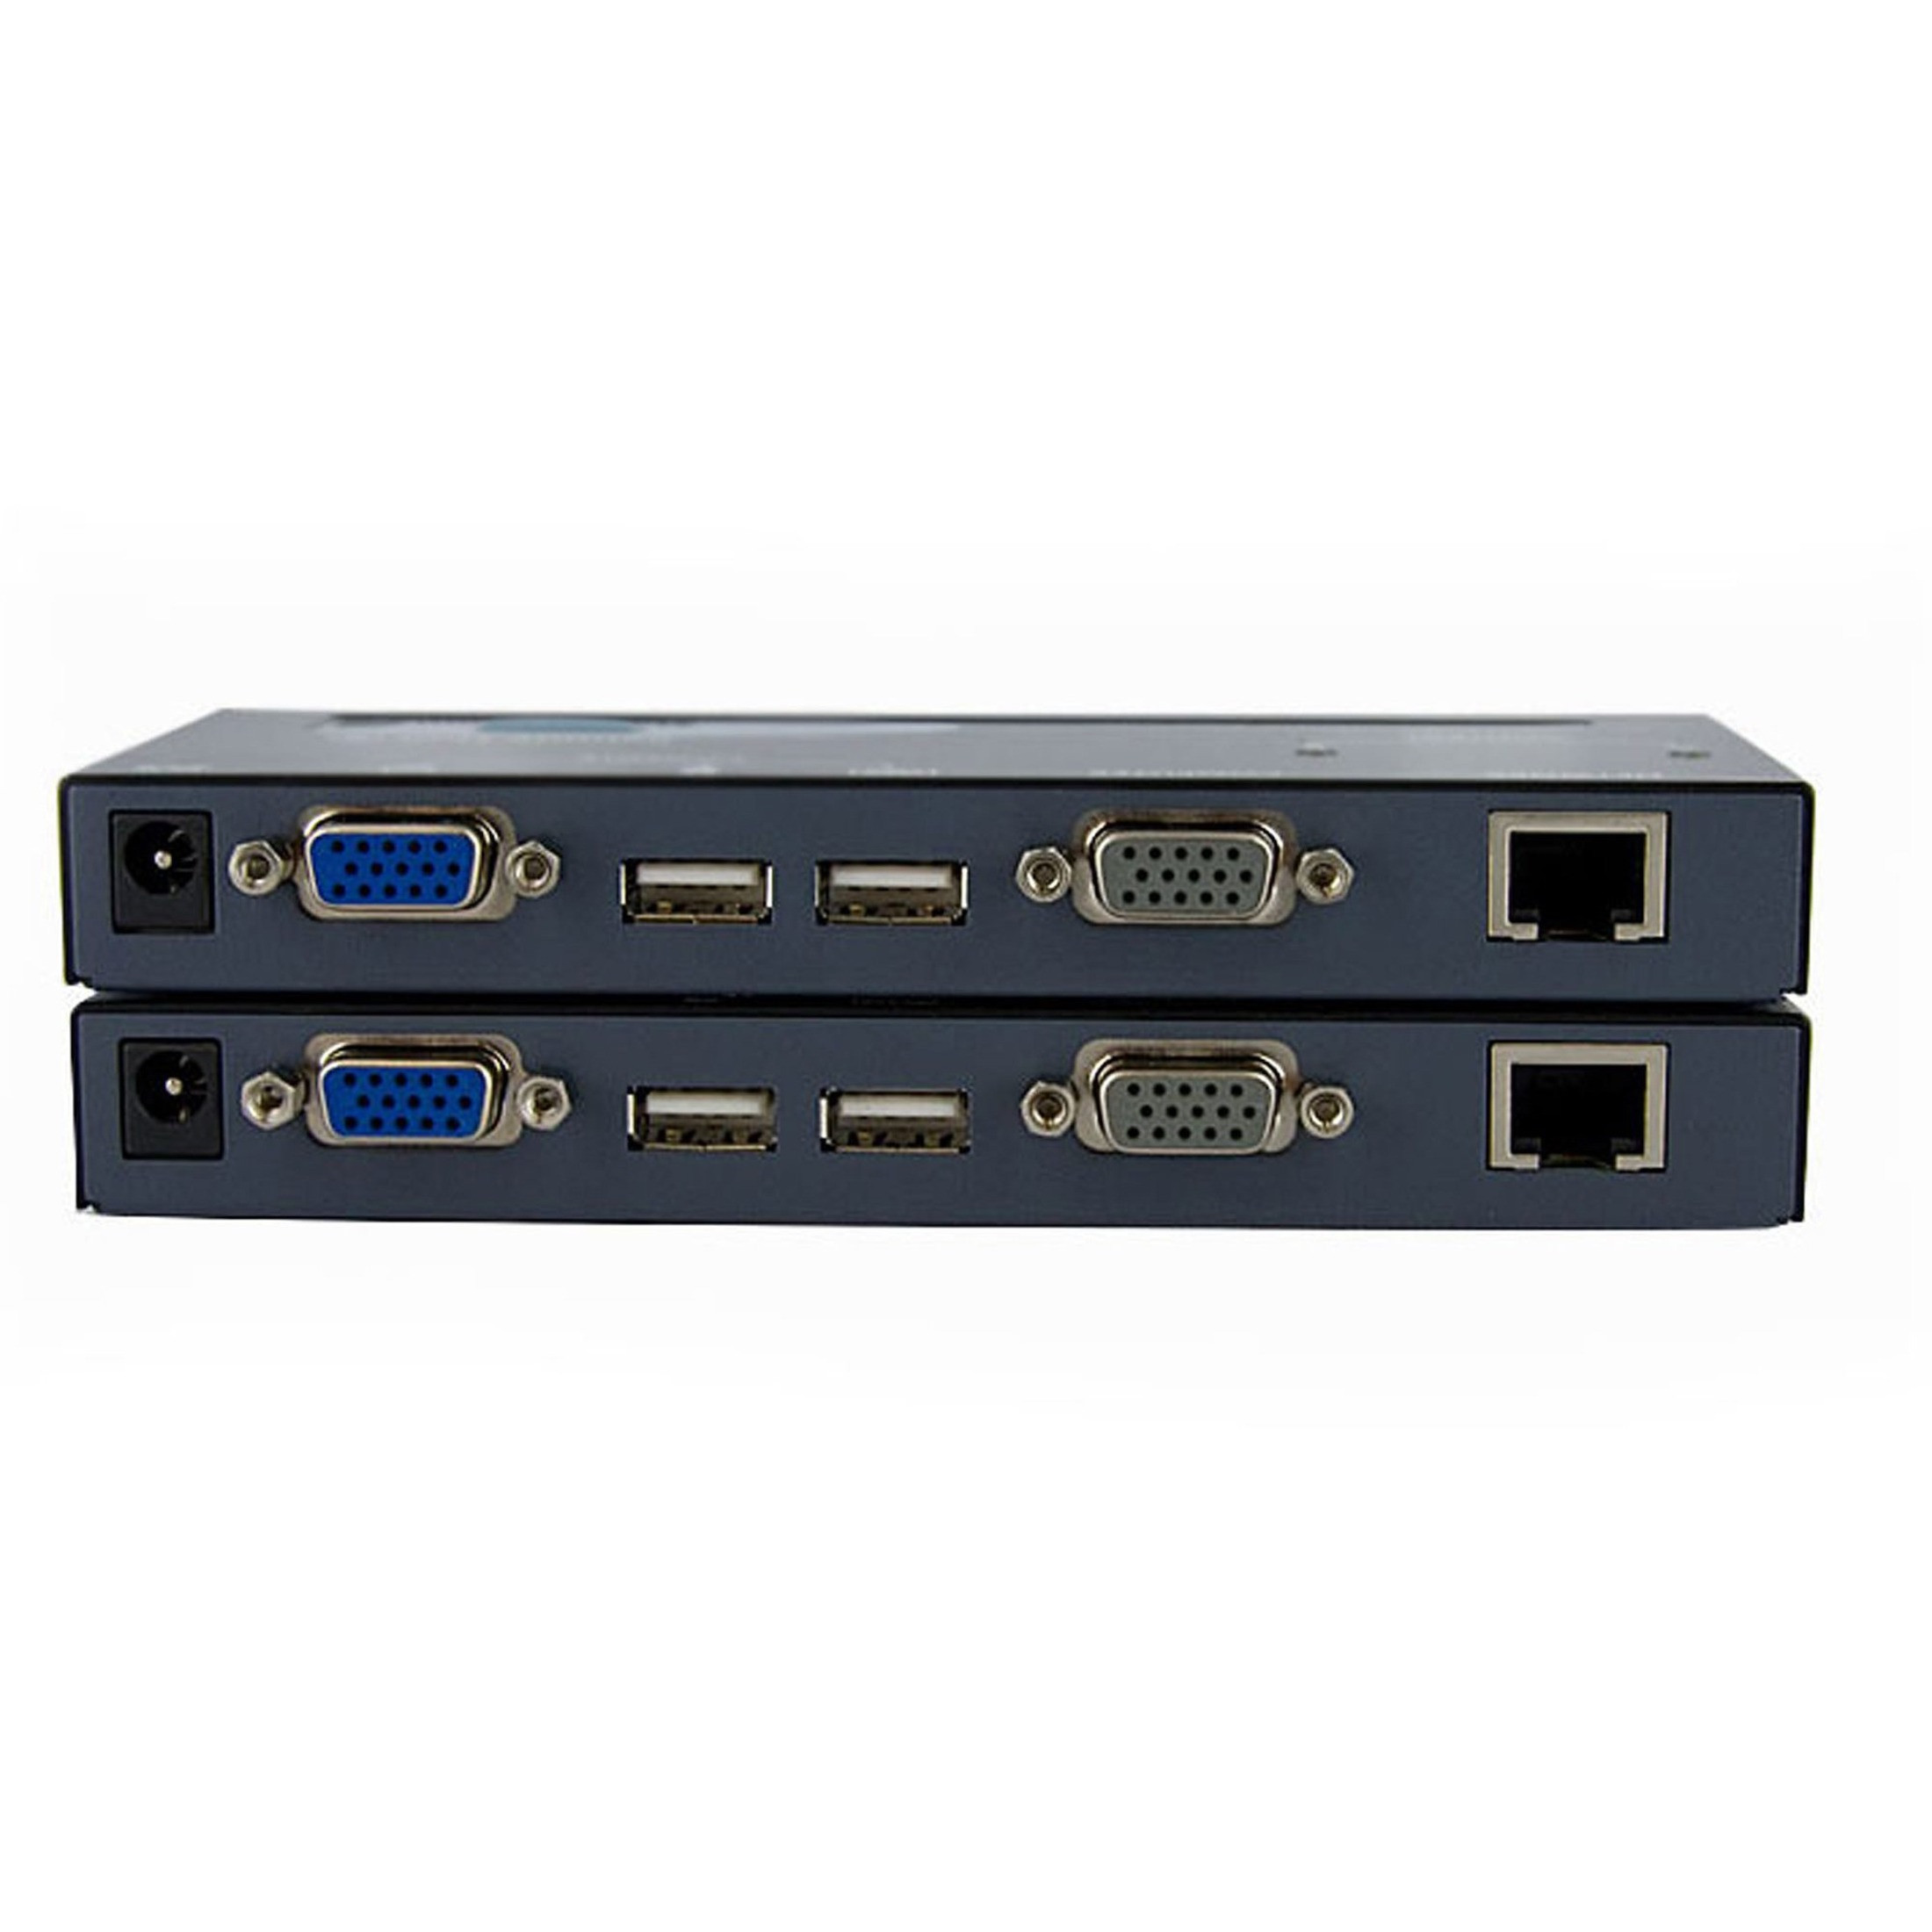 Startech .com USB VGA KVM Console Extender over CAT5 UTP (500 ft)Operate a USB & VGA KVM or PC up to 500ft away as if it were right in front… SV565UTPU